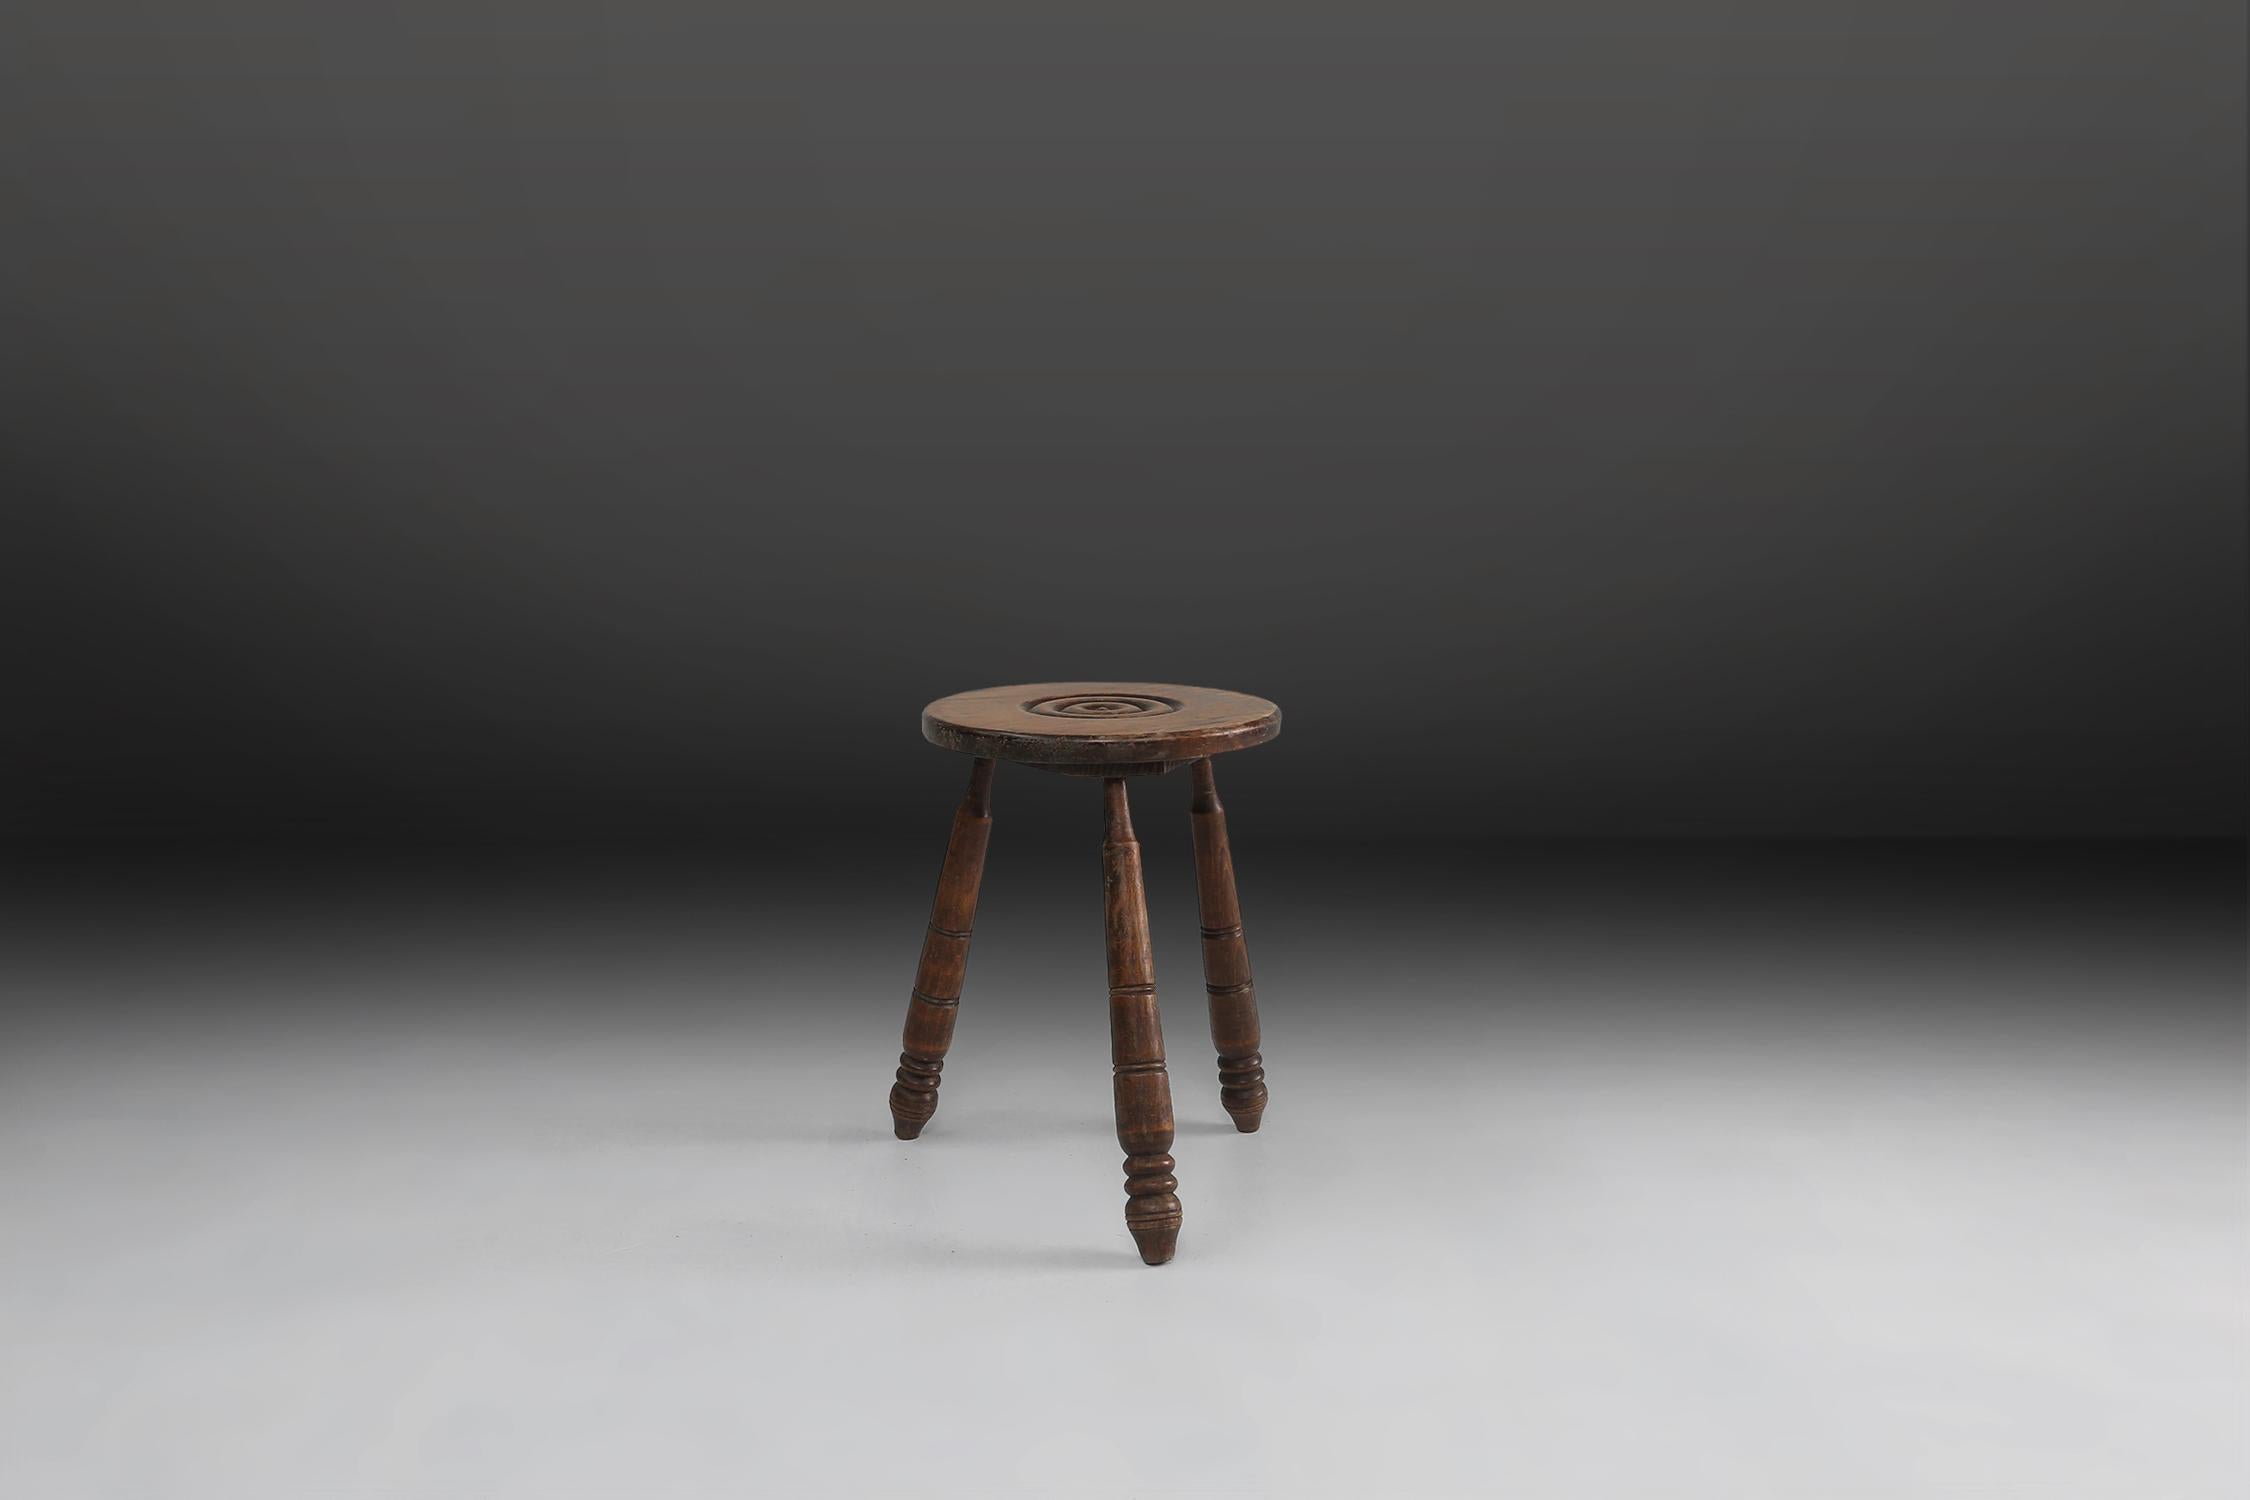 Brutalist stool made of solid wood with some nice patina on the wood.